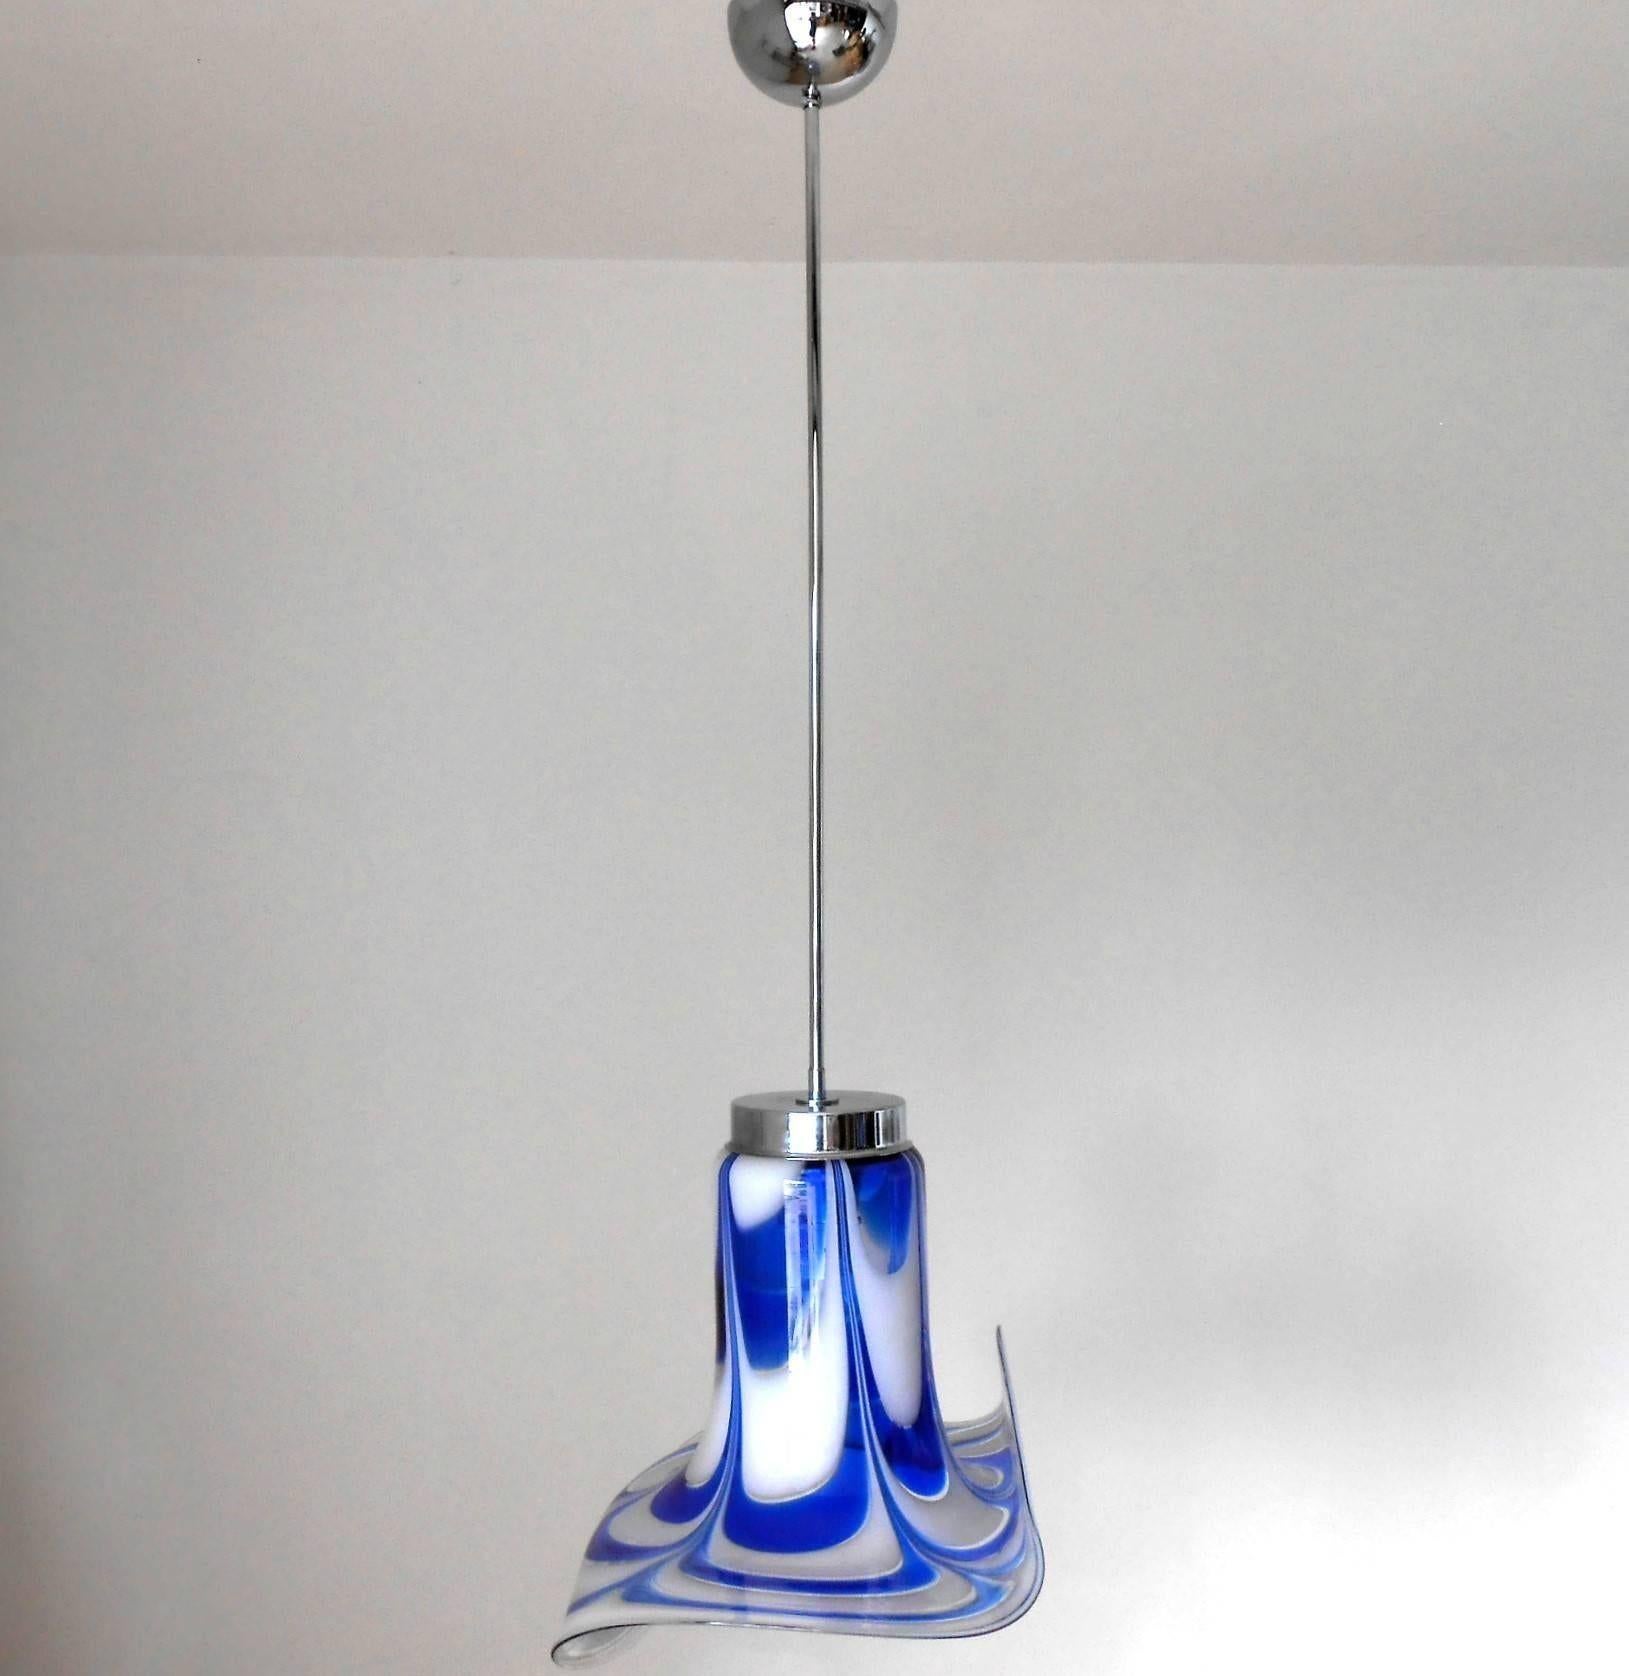 Italian vintage pendant with blue and white Murano glass blown into a blend mosaic and shaped curves / Designed by Vistosi circa 1960’s / Made in Italy
 
Dimensions:
 
44